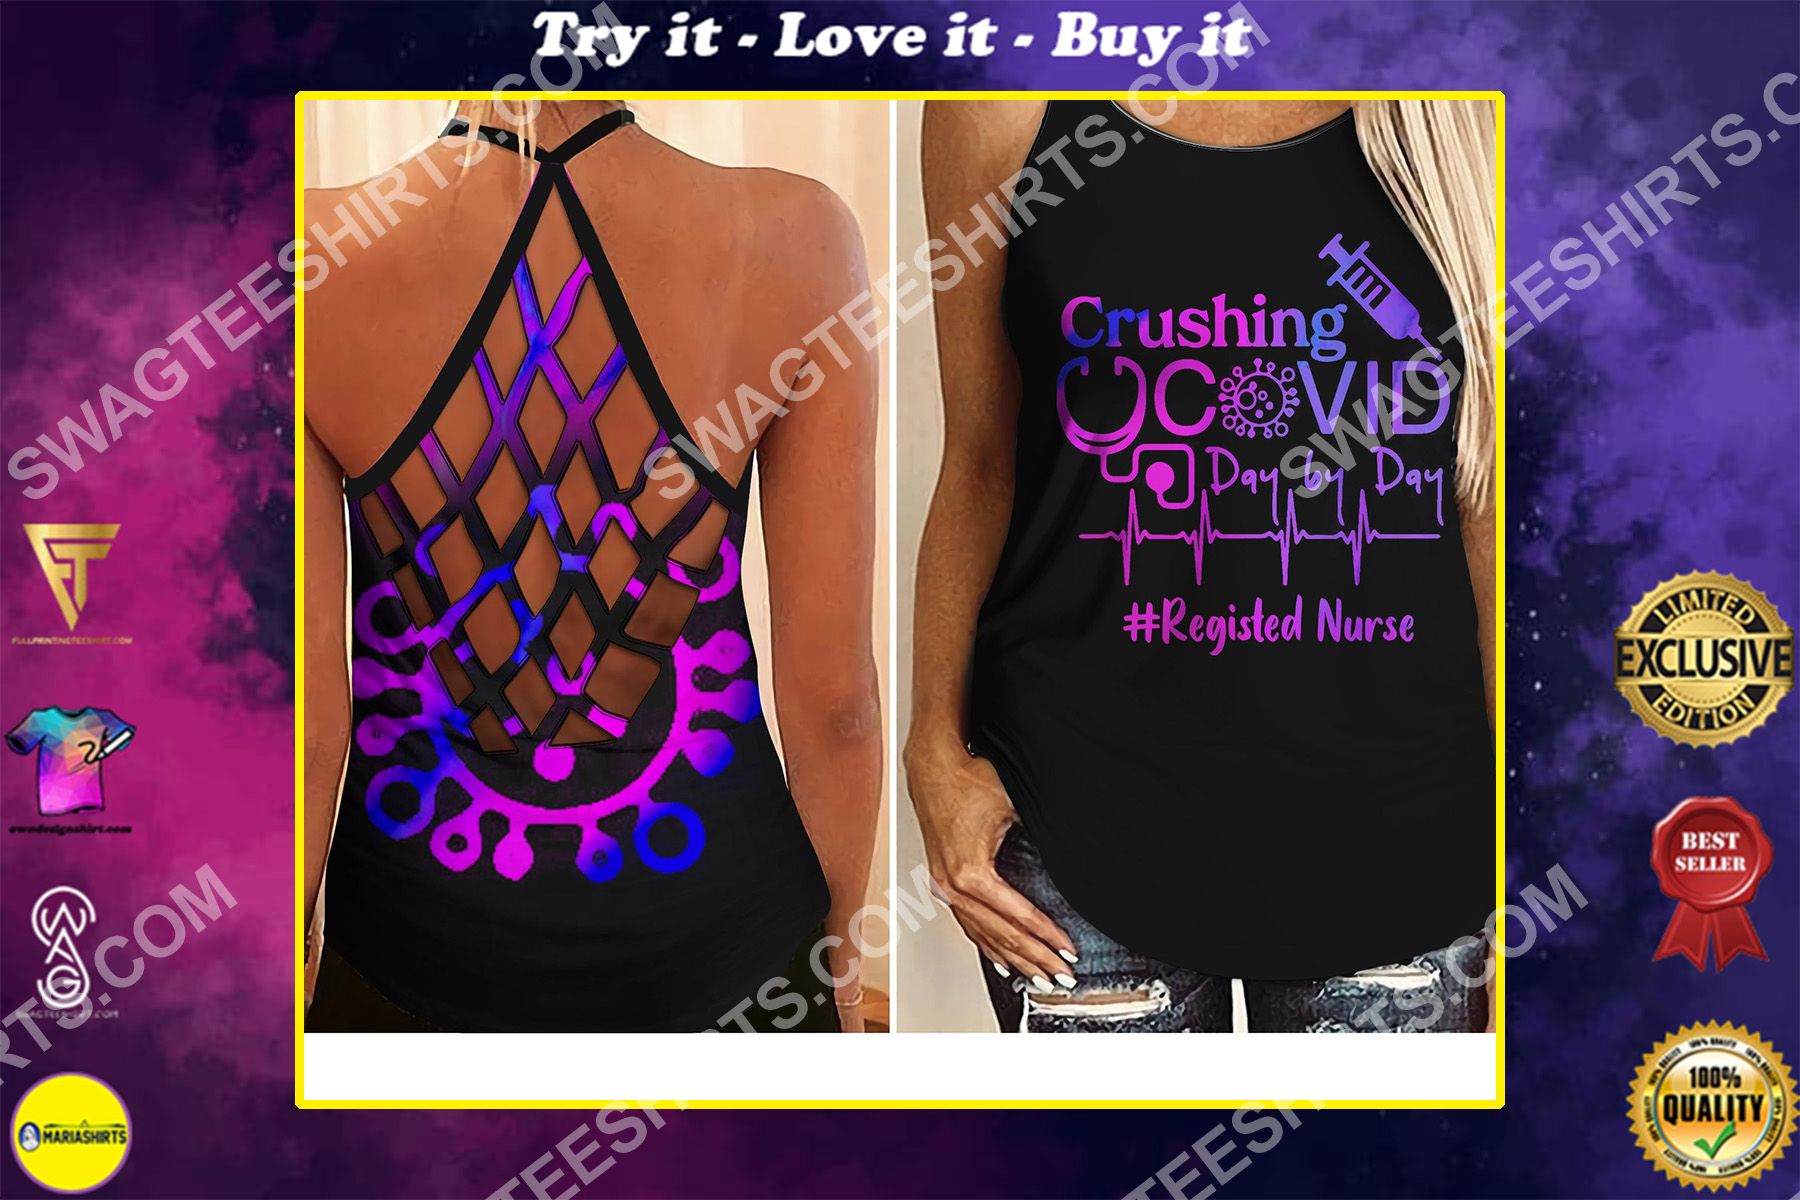 crushing registed nurse day by day all over printed criss-cross tank top